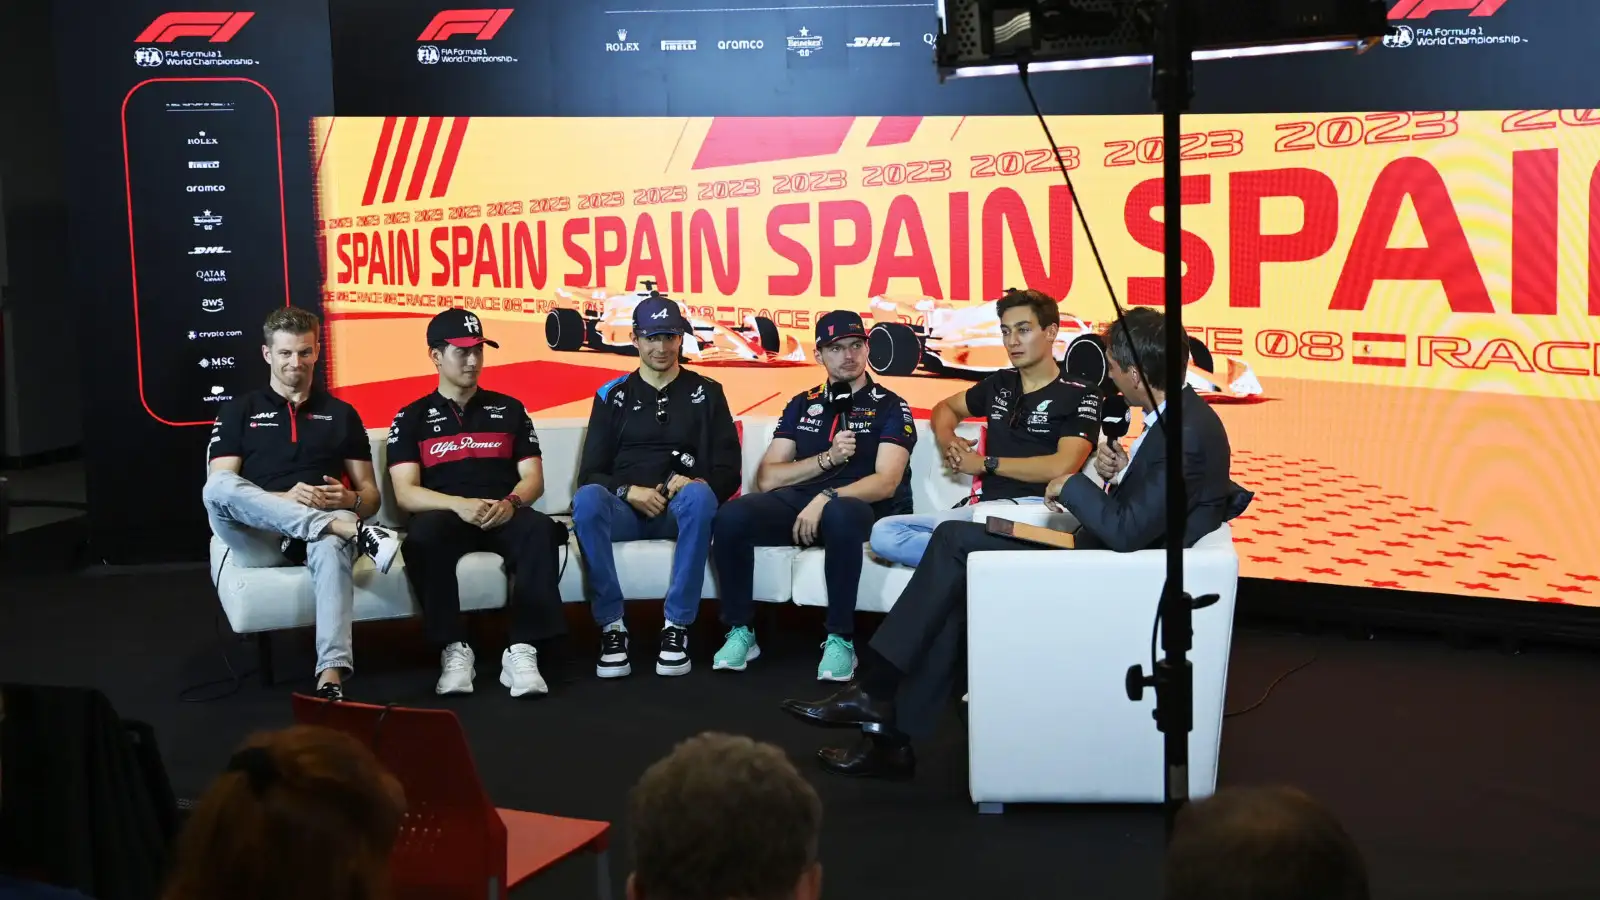 F1 Press conference on Thursday at the Spanish Grand Prix. Barcelona, June 2023.